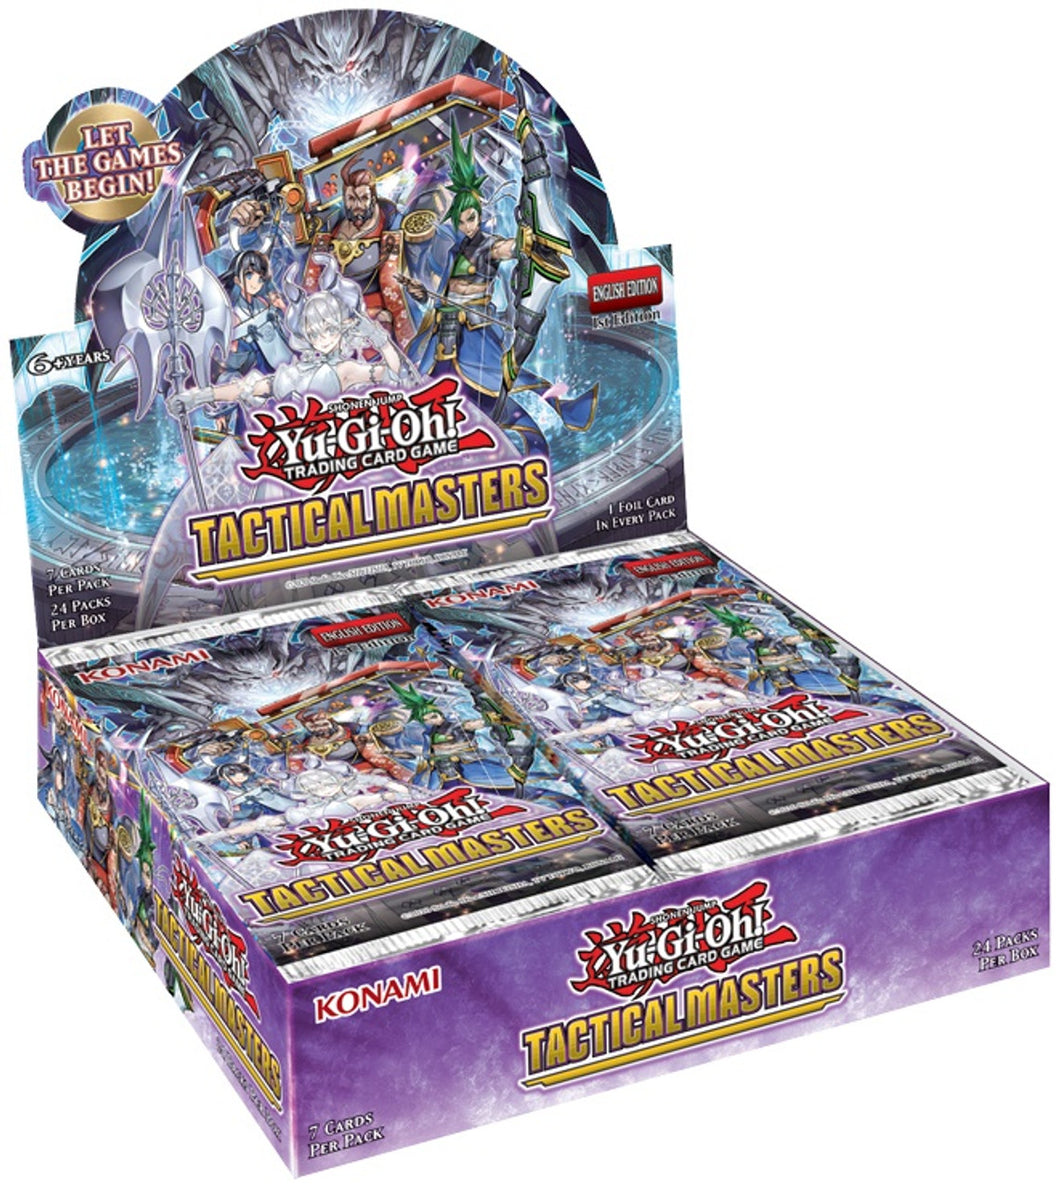 Tactical Masters - 1st Edition - Booster Box